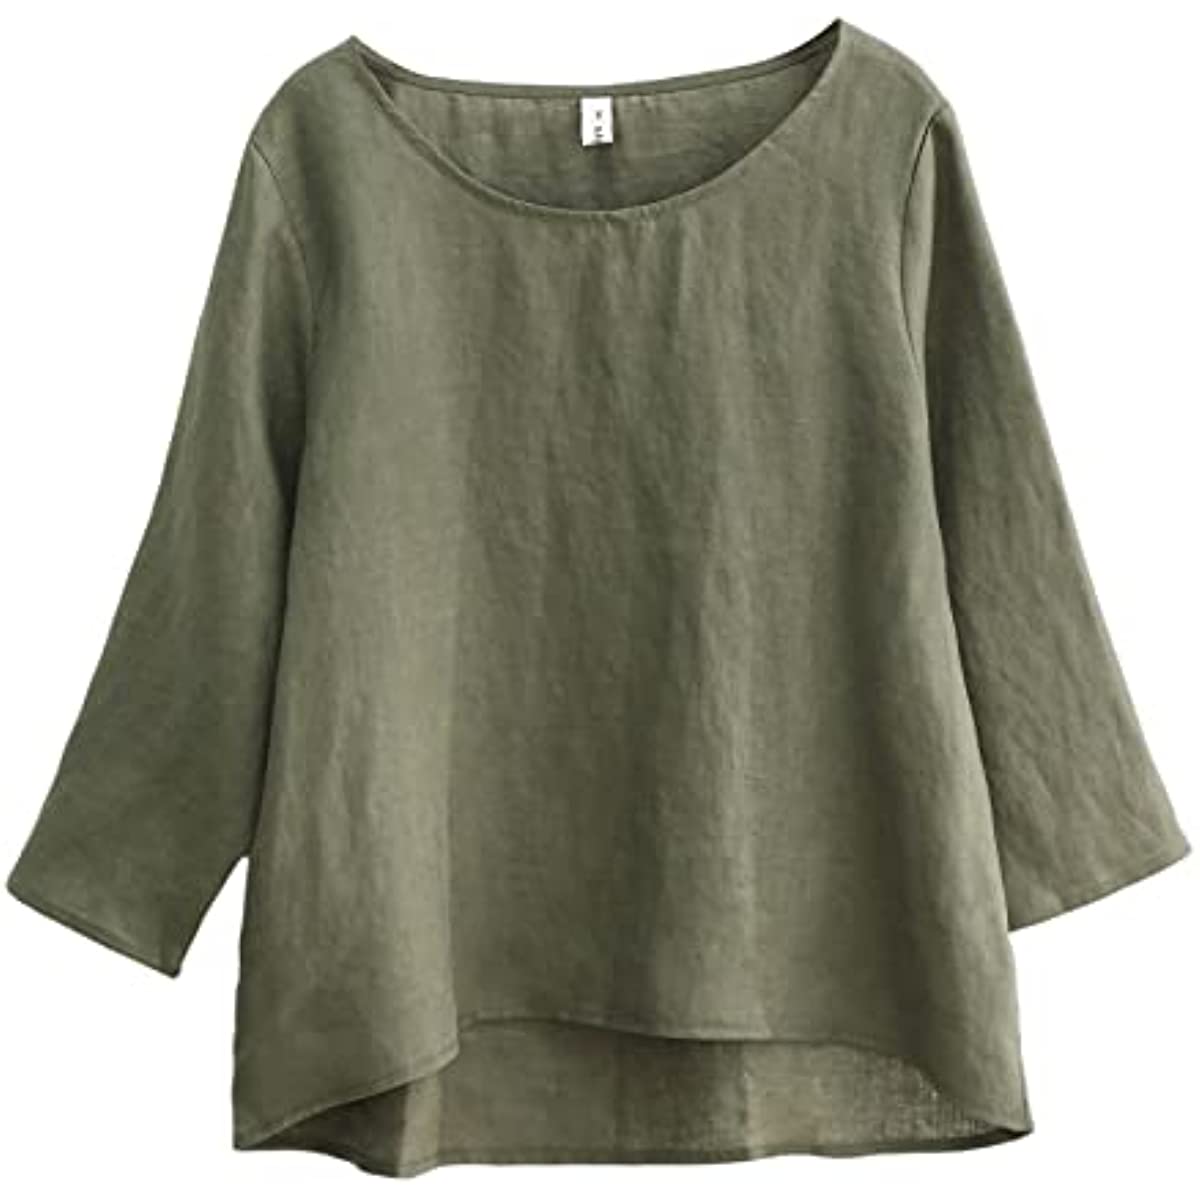 FAFWYP Womens Summer Casual Tops, Plus Size Women's Solid Loose Cropped  T-shirt 3/4 Sleeve Round Neck Cotton Linen Split Pullover Lightweight Basic  Blouse 